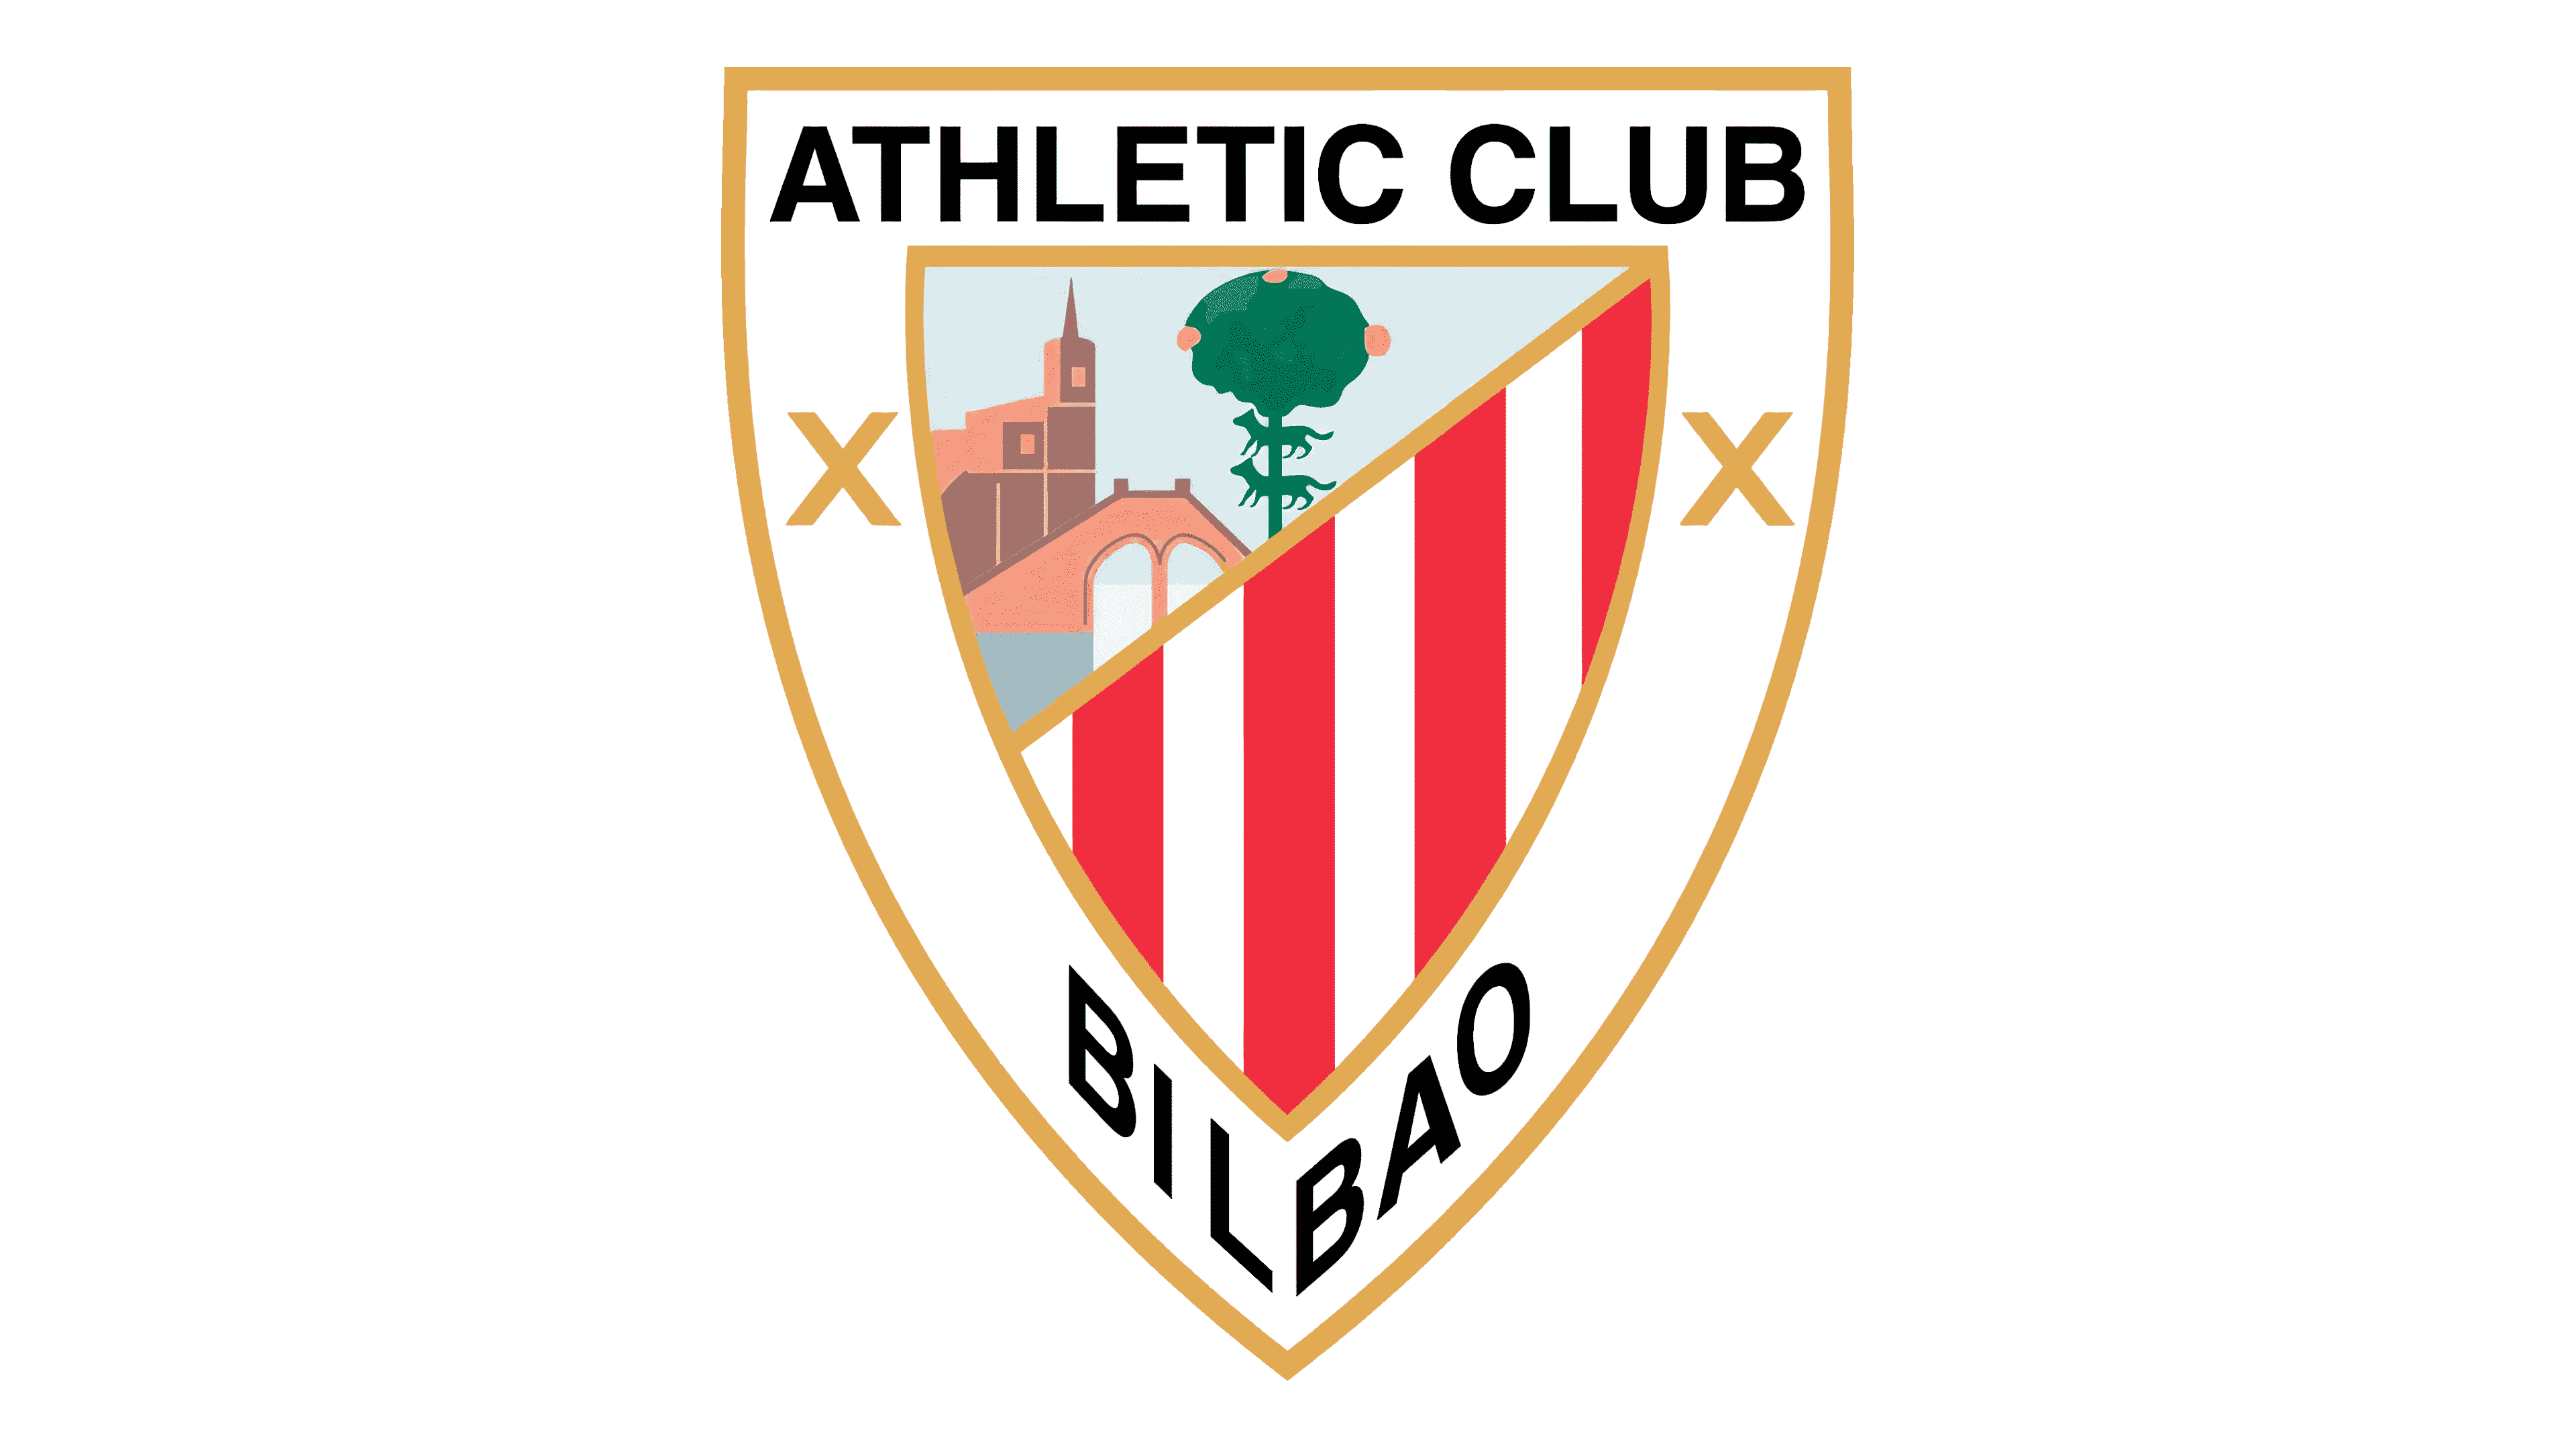 Athletic Club Bilbao Logo editorial stock image. Illustration of available  - 129652584